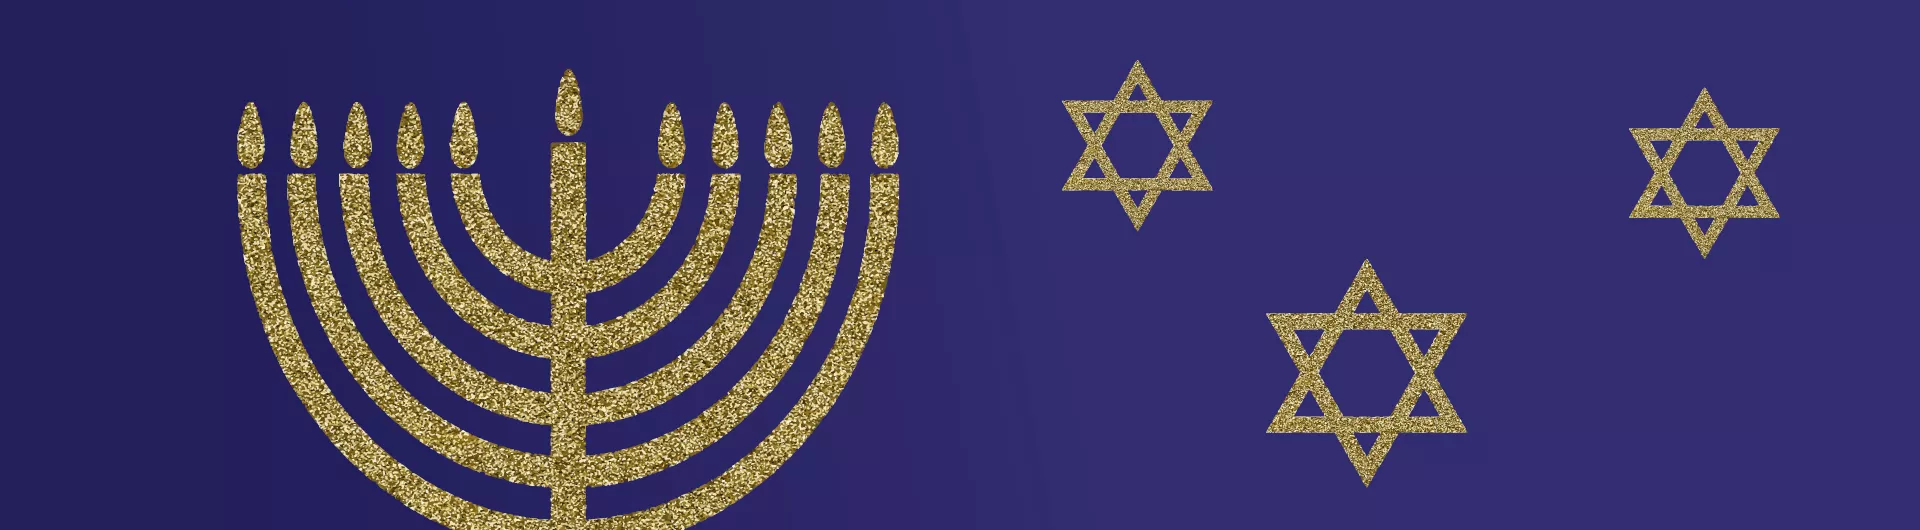 Blue background with gold image of menorah and star